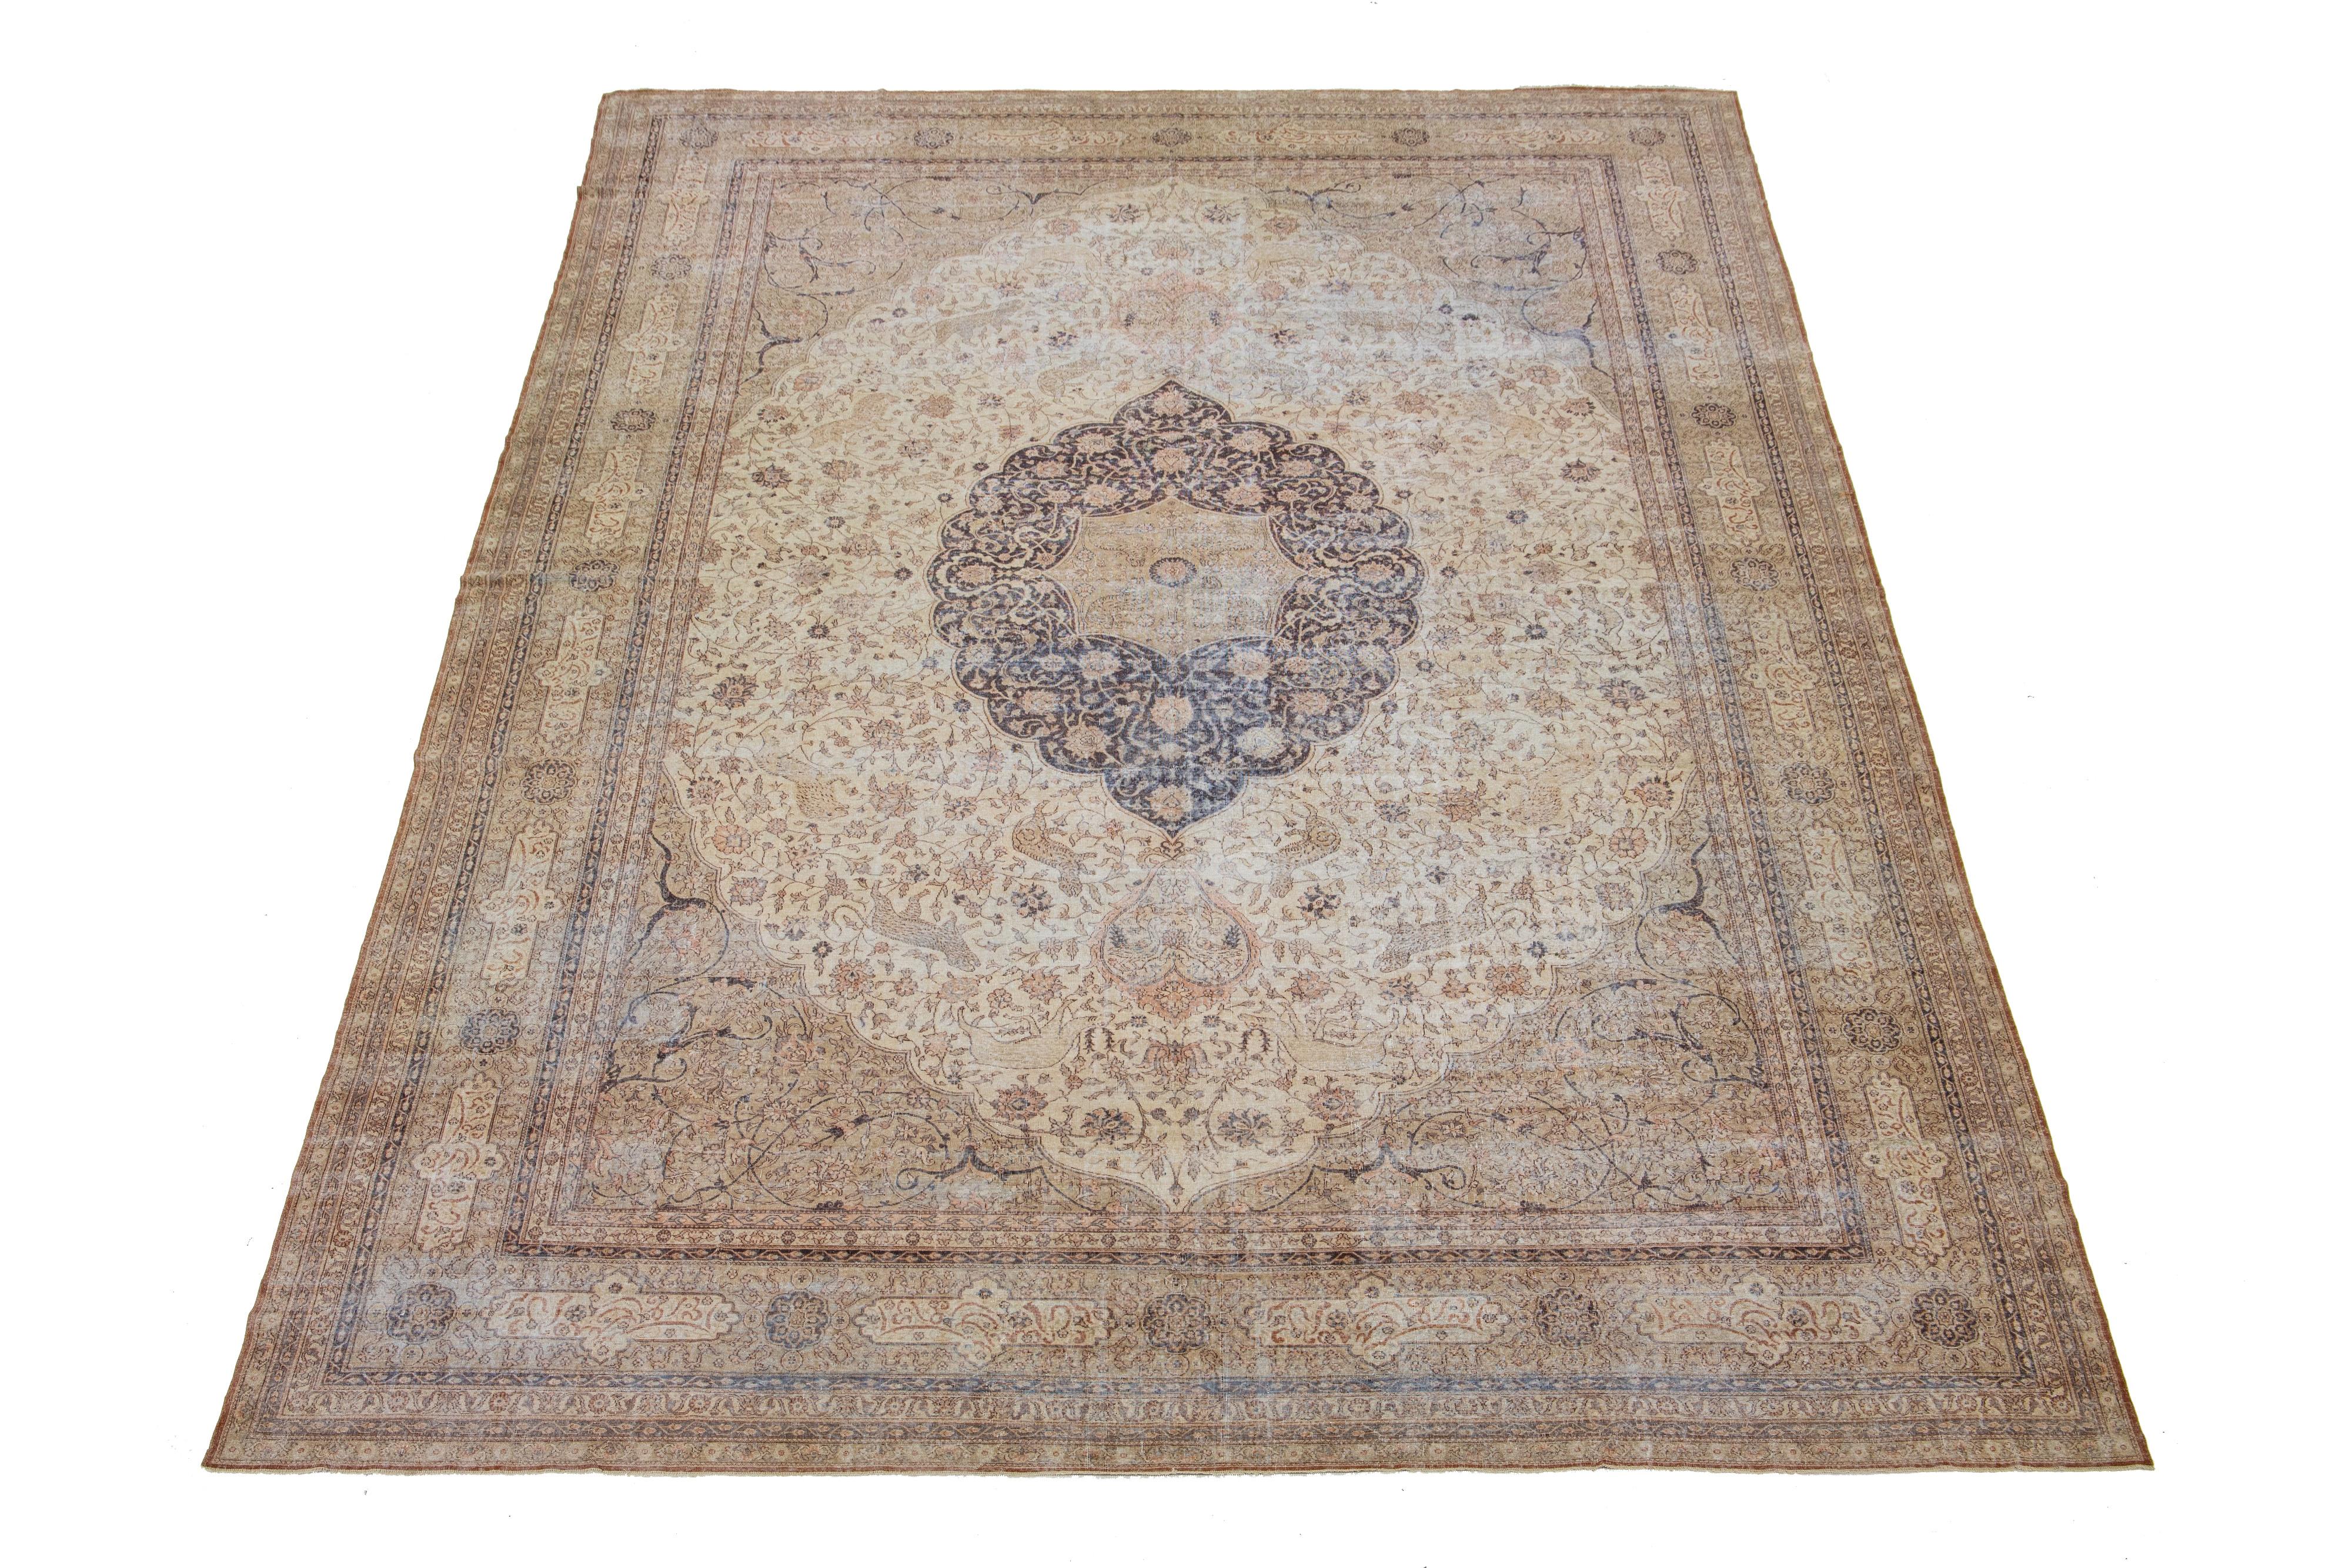 1910s Persian Sivas wool rug, handcrafted, showcases a traditional floral pattern. The contrast between the beige backdrop and the bold blue and peach emphasizes the design.

This rug measures 13'1